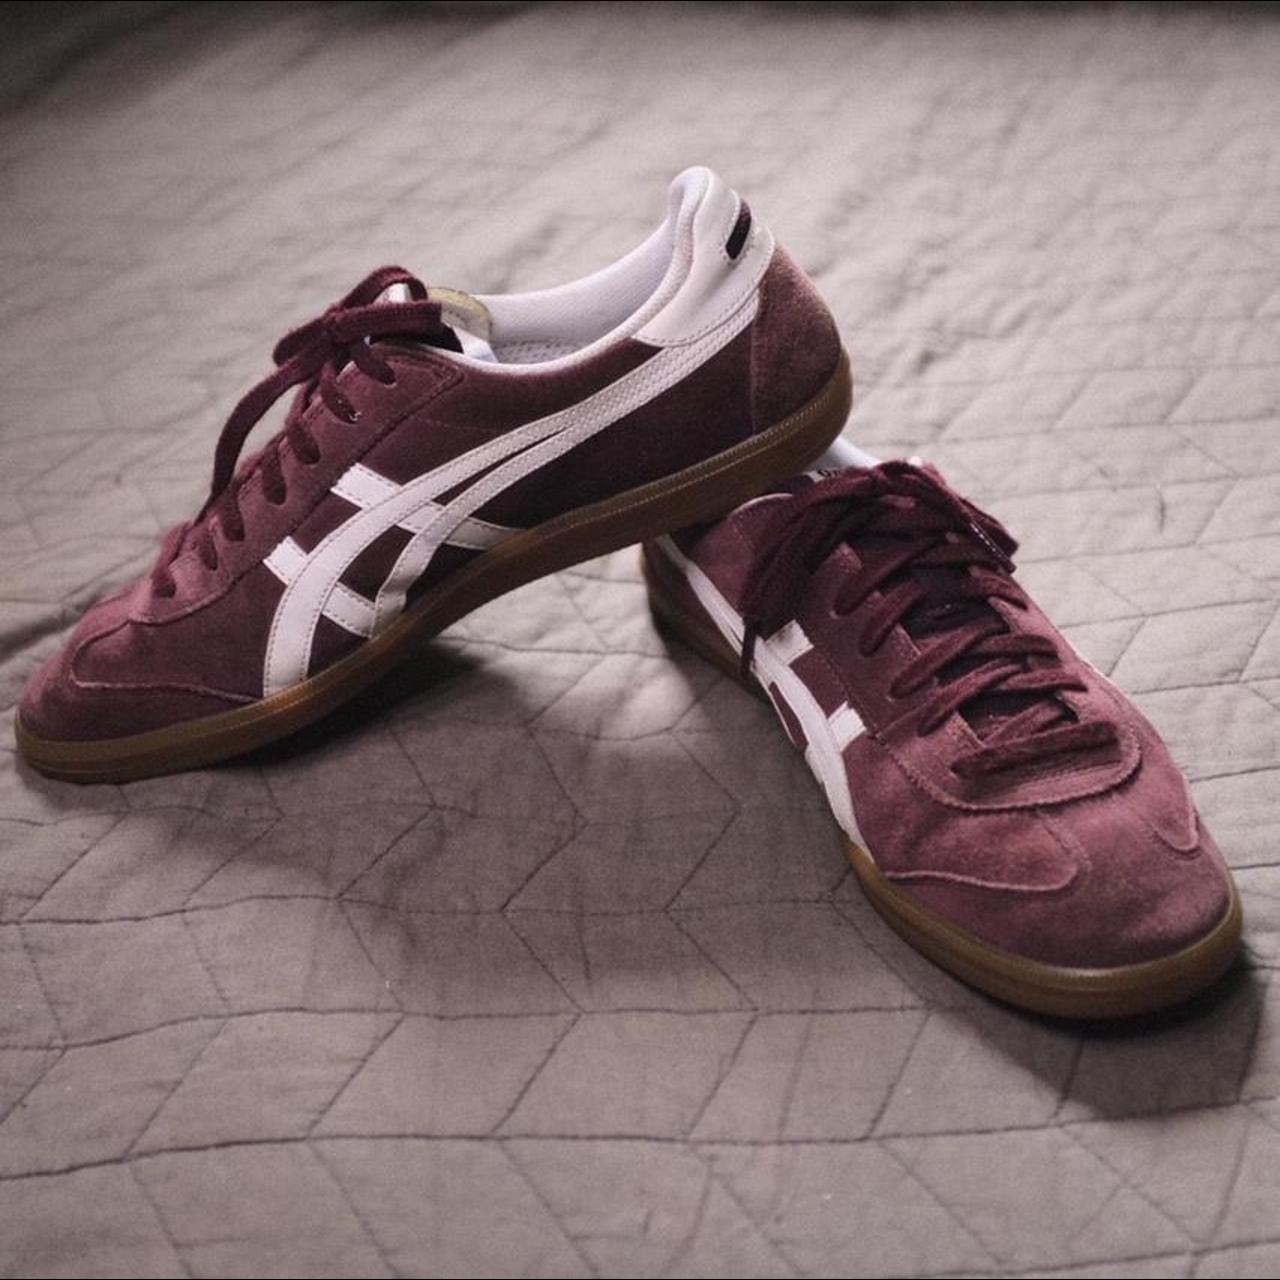 Product Image 1 - Barely worn burgundy suede Onitsuka